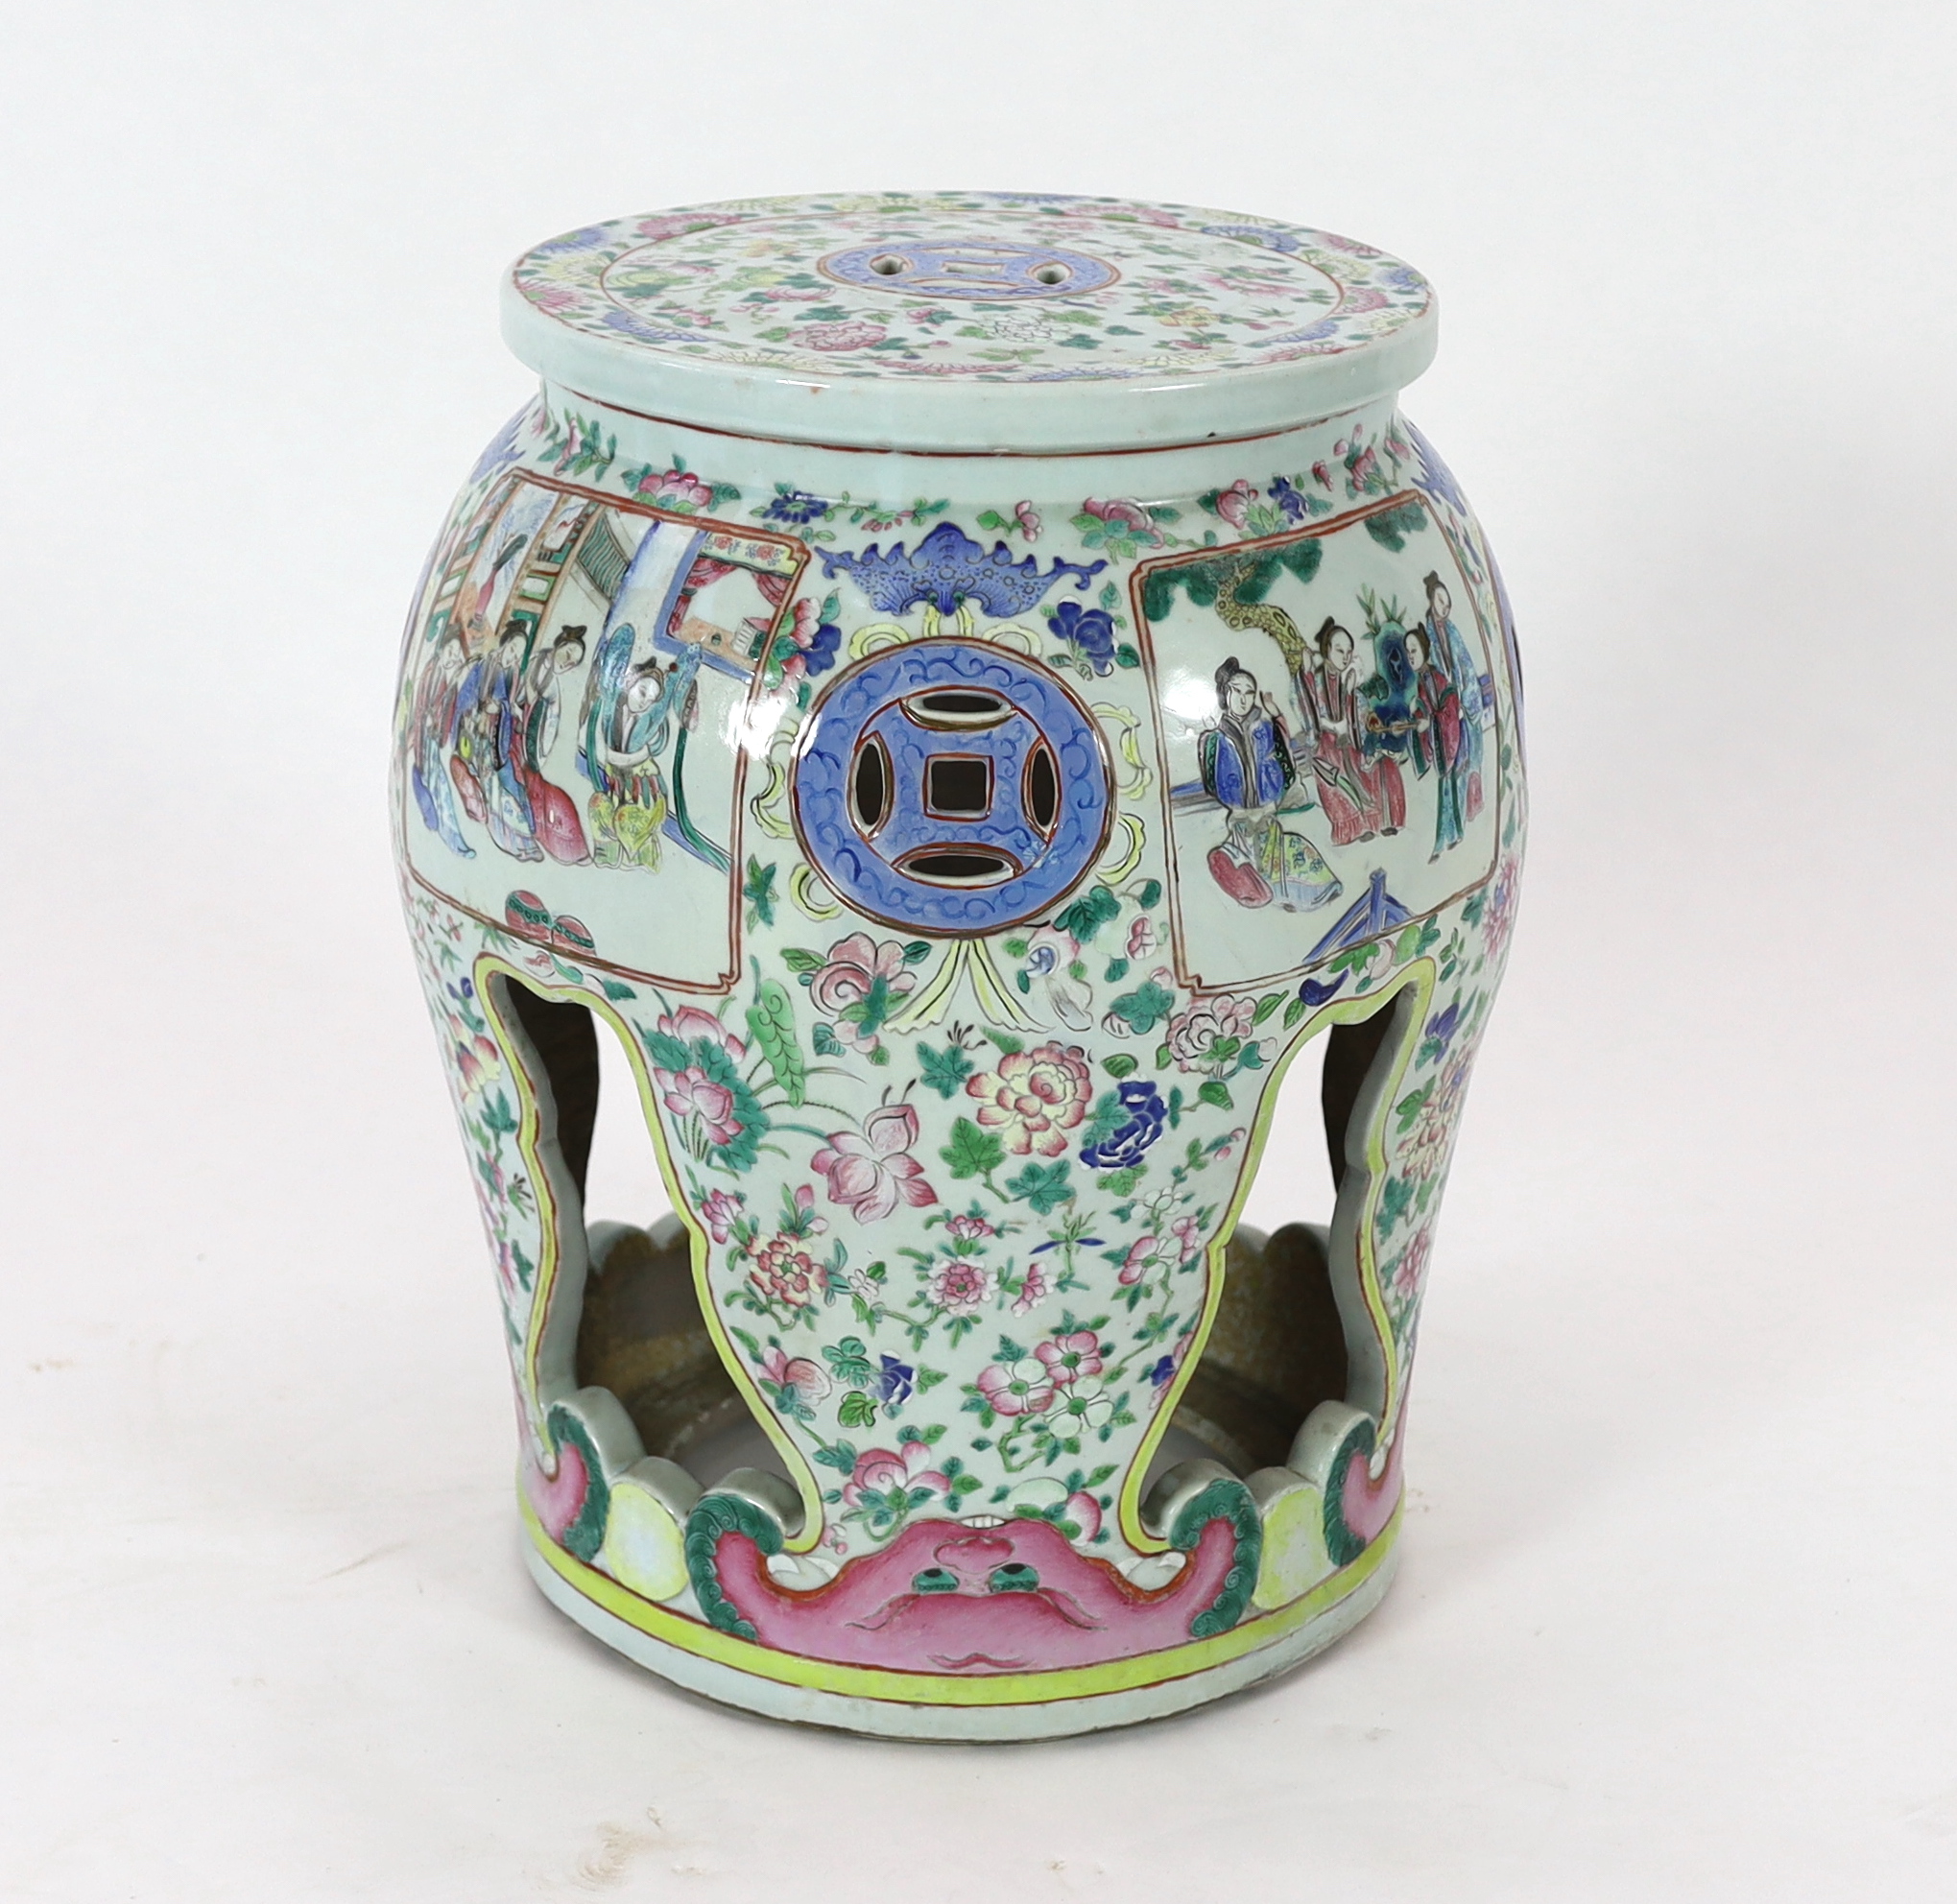 A Chinese Canton decorated famille rose garden seat, 19th century, broken and restored